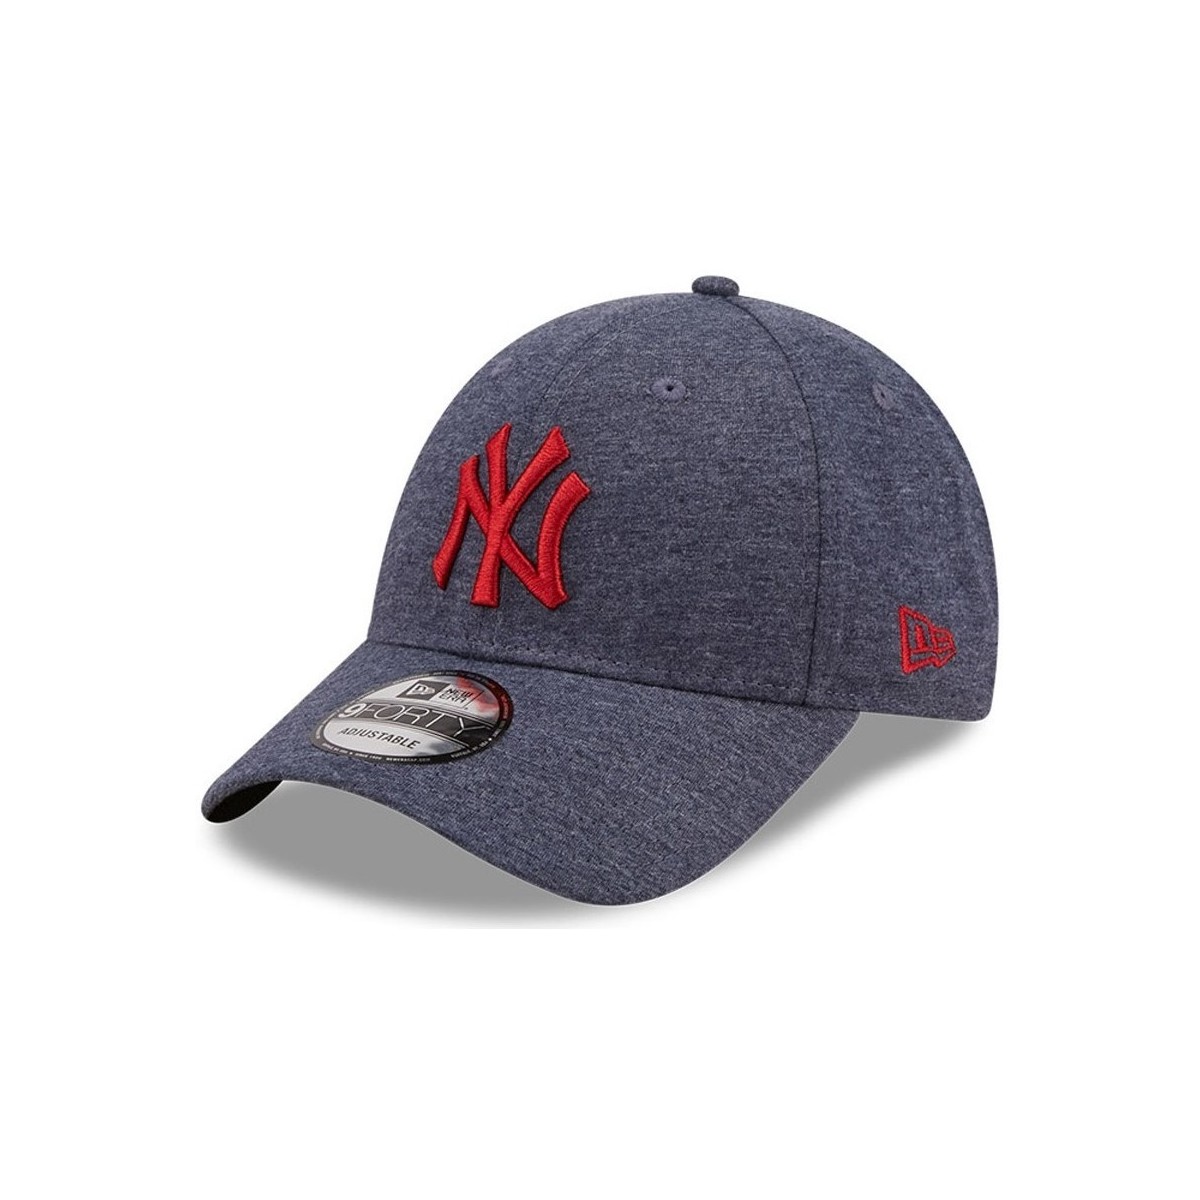 Accessoires textile Femme Casquettes New-Era NY Yankees Jersey 9Forty Gris